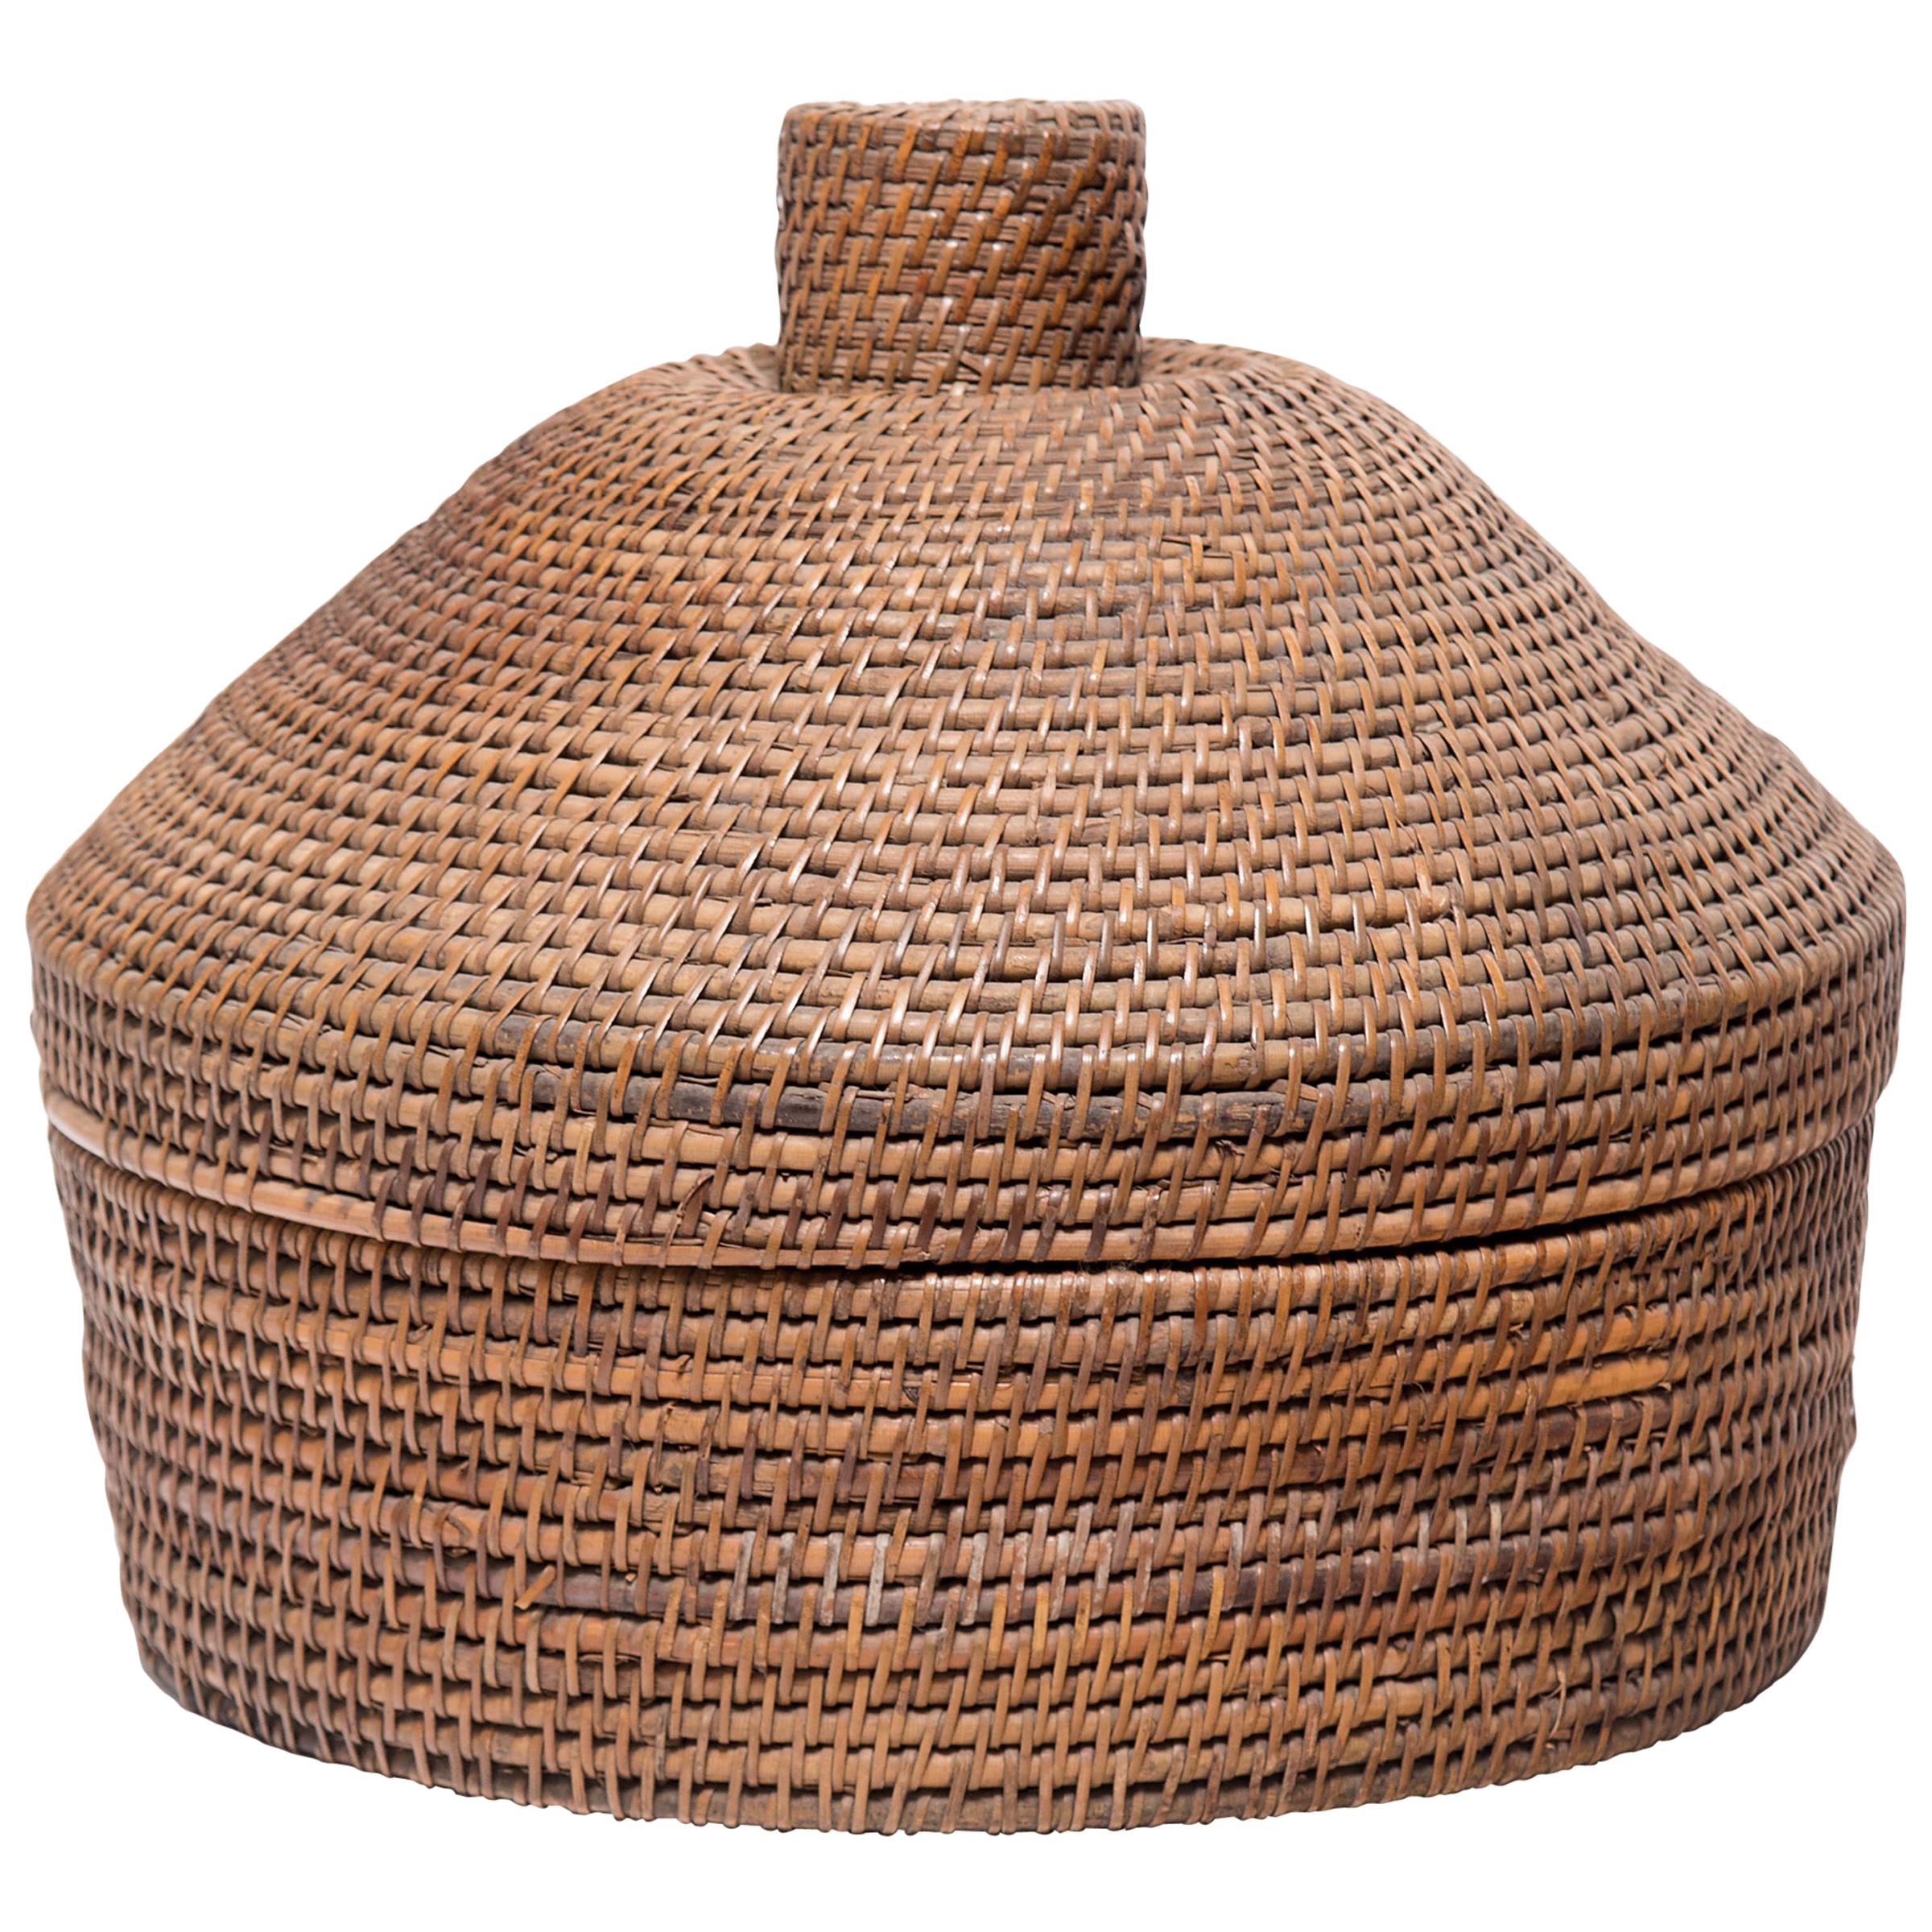 Provincial Chinese Woven Summer Hat Box, circa 1850